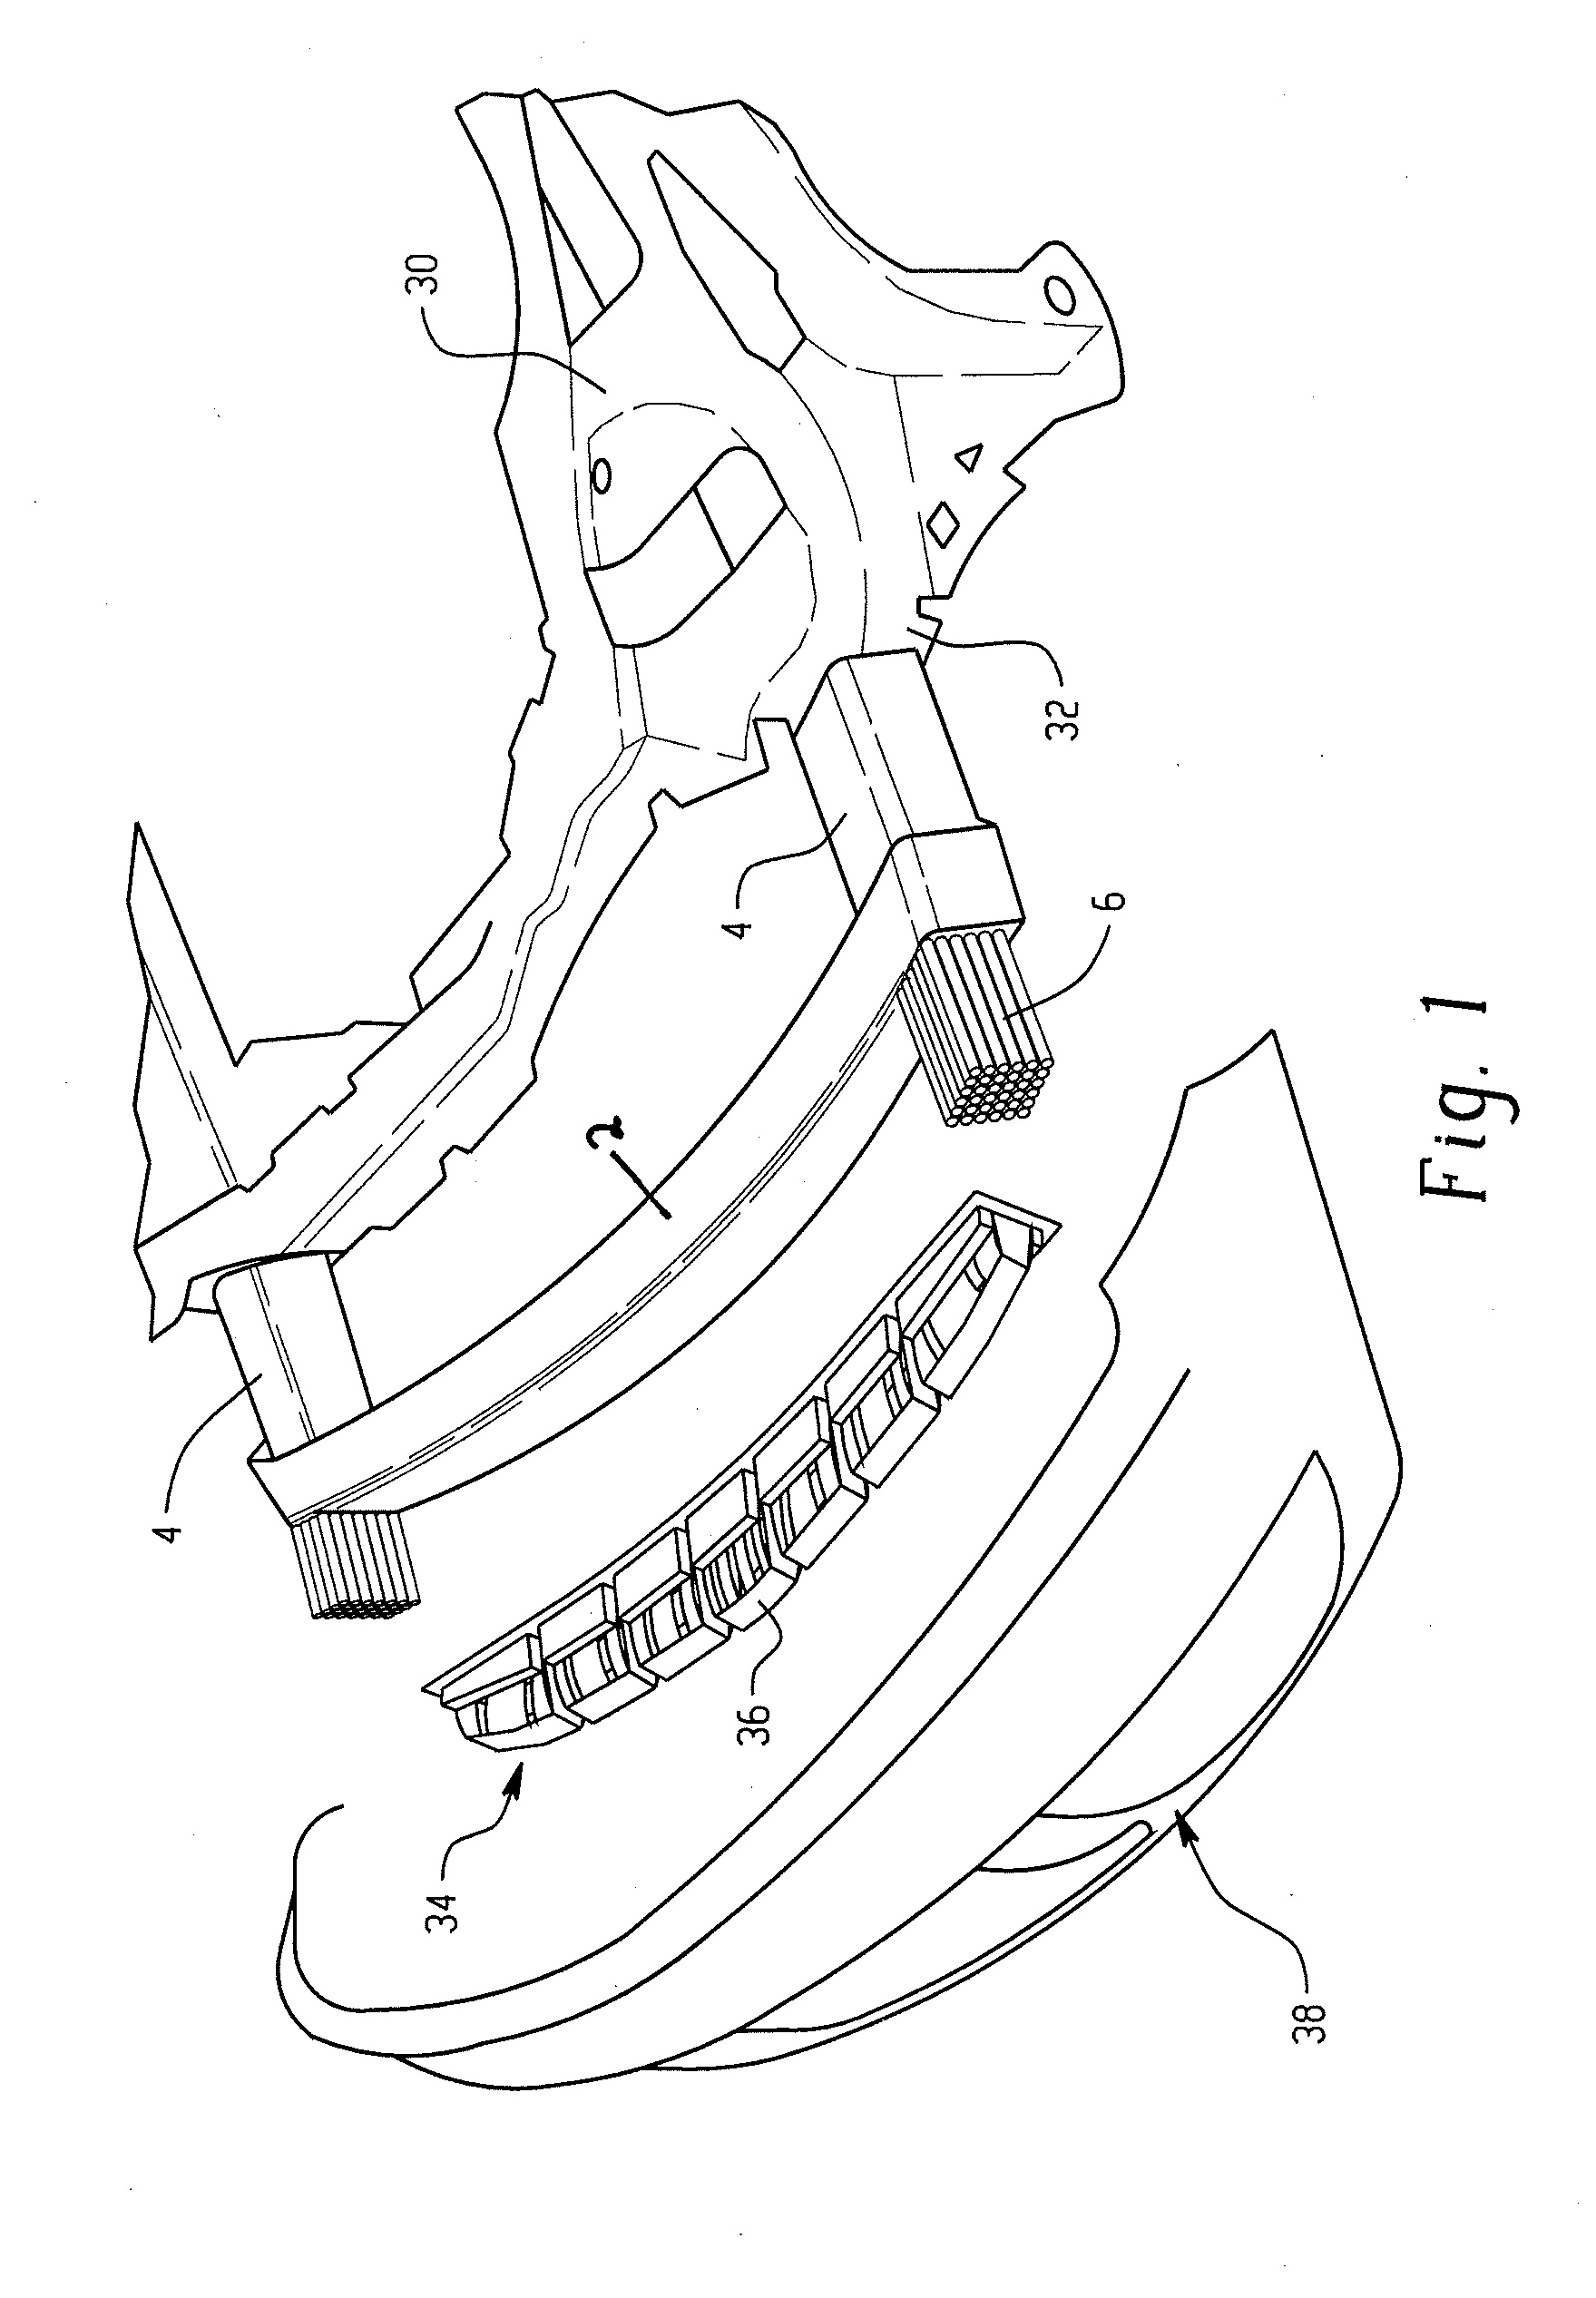 Polymer, energy absorber rail extension, methods of making and vehicles using the same